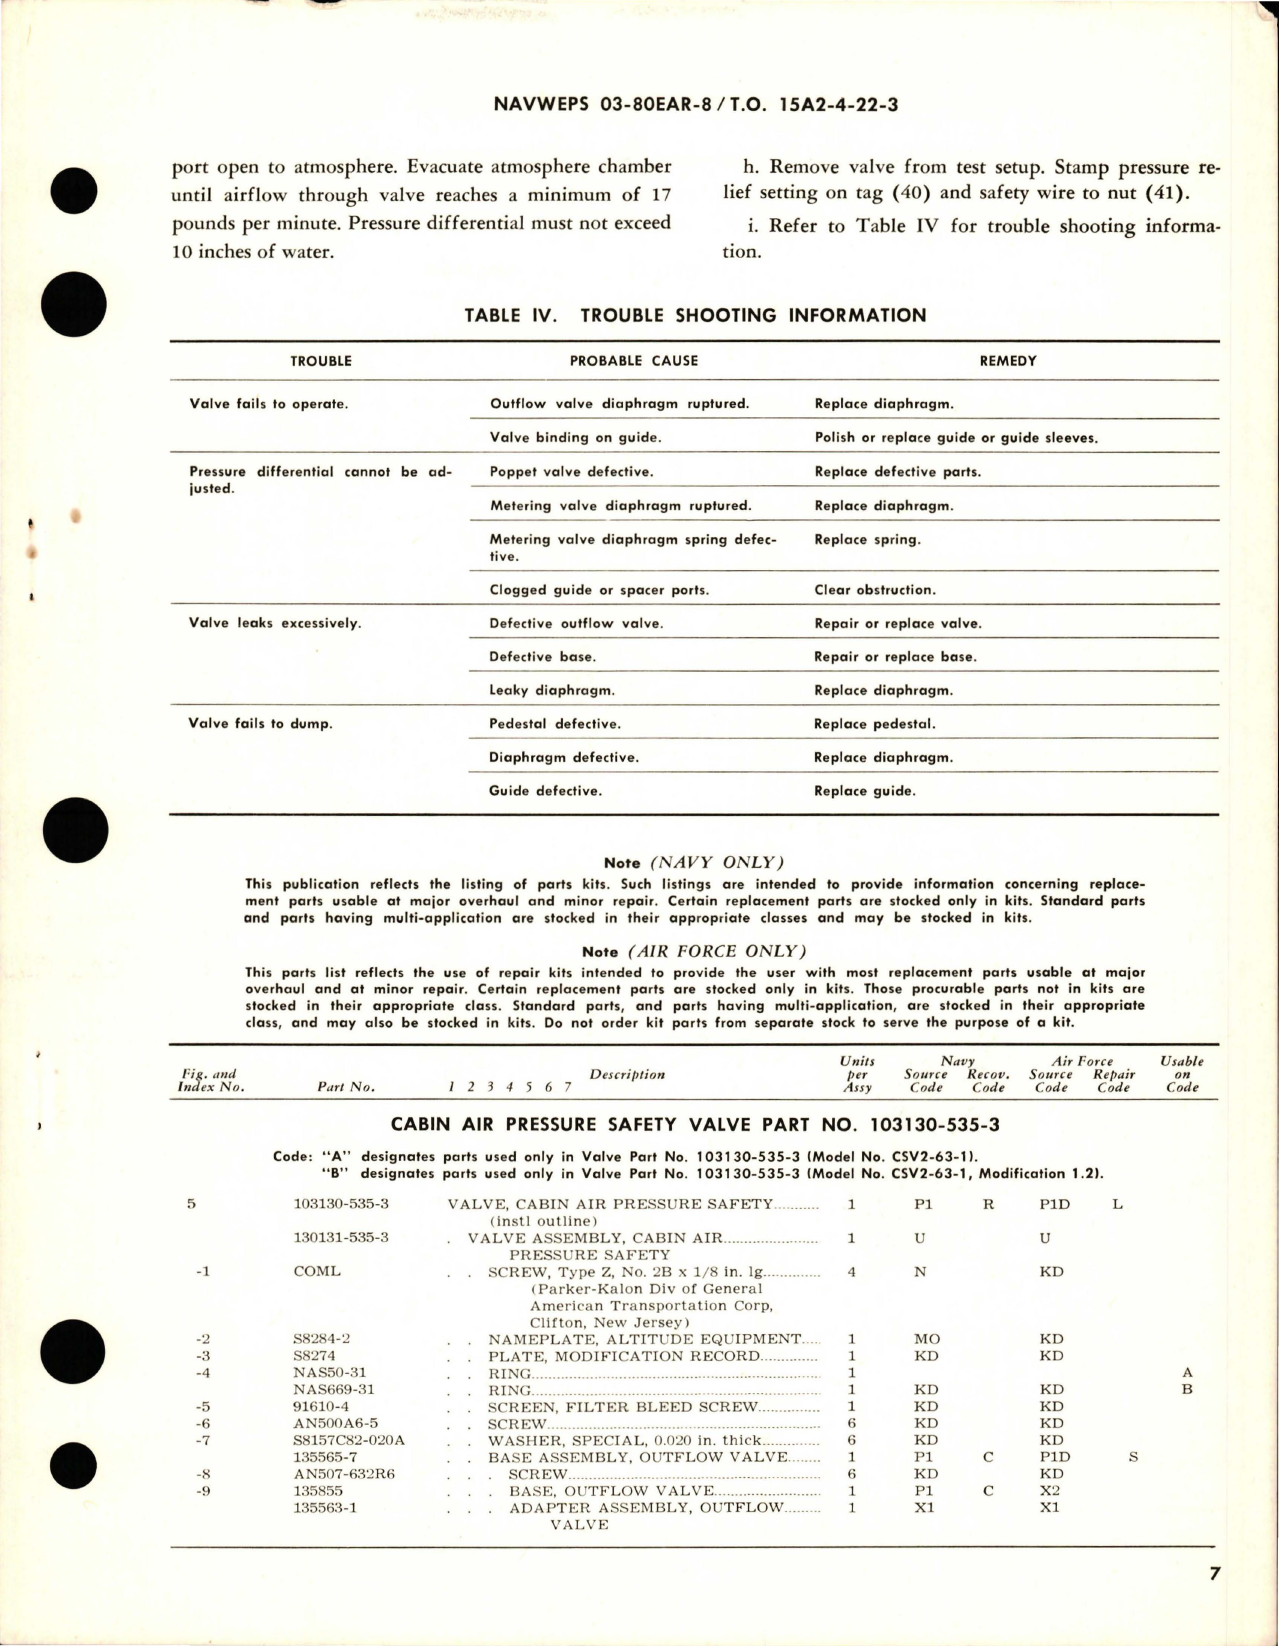 Sample page 7 from AirCorps Library document: Overhaul Instructions with Parts Breakdown for Cabin Air Pressure Safety Valve - Part 103130-535-3